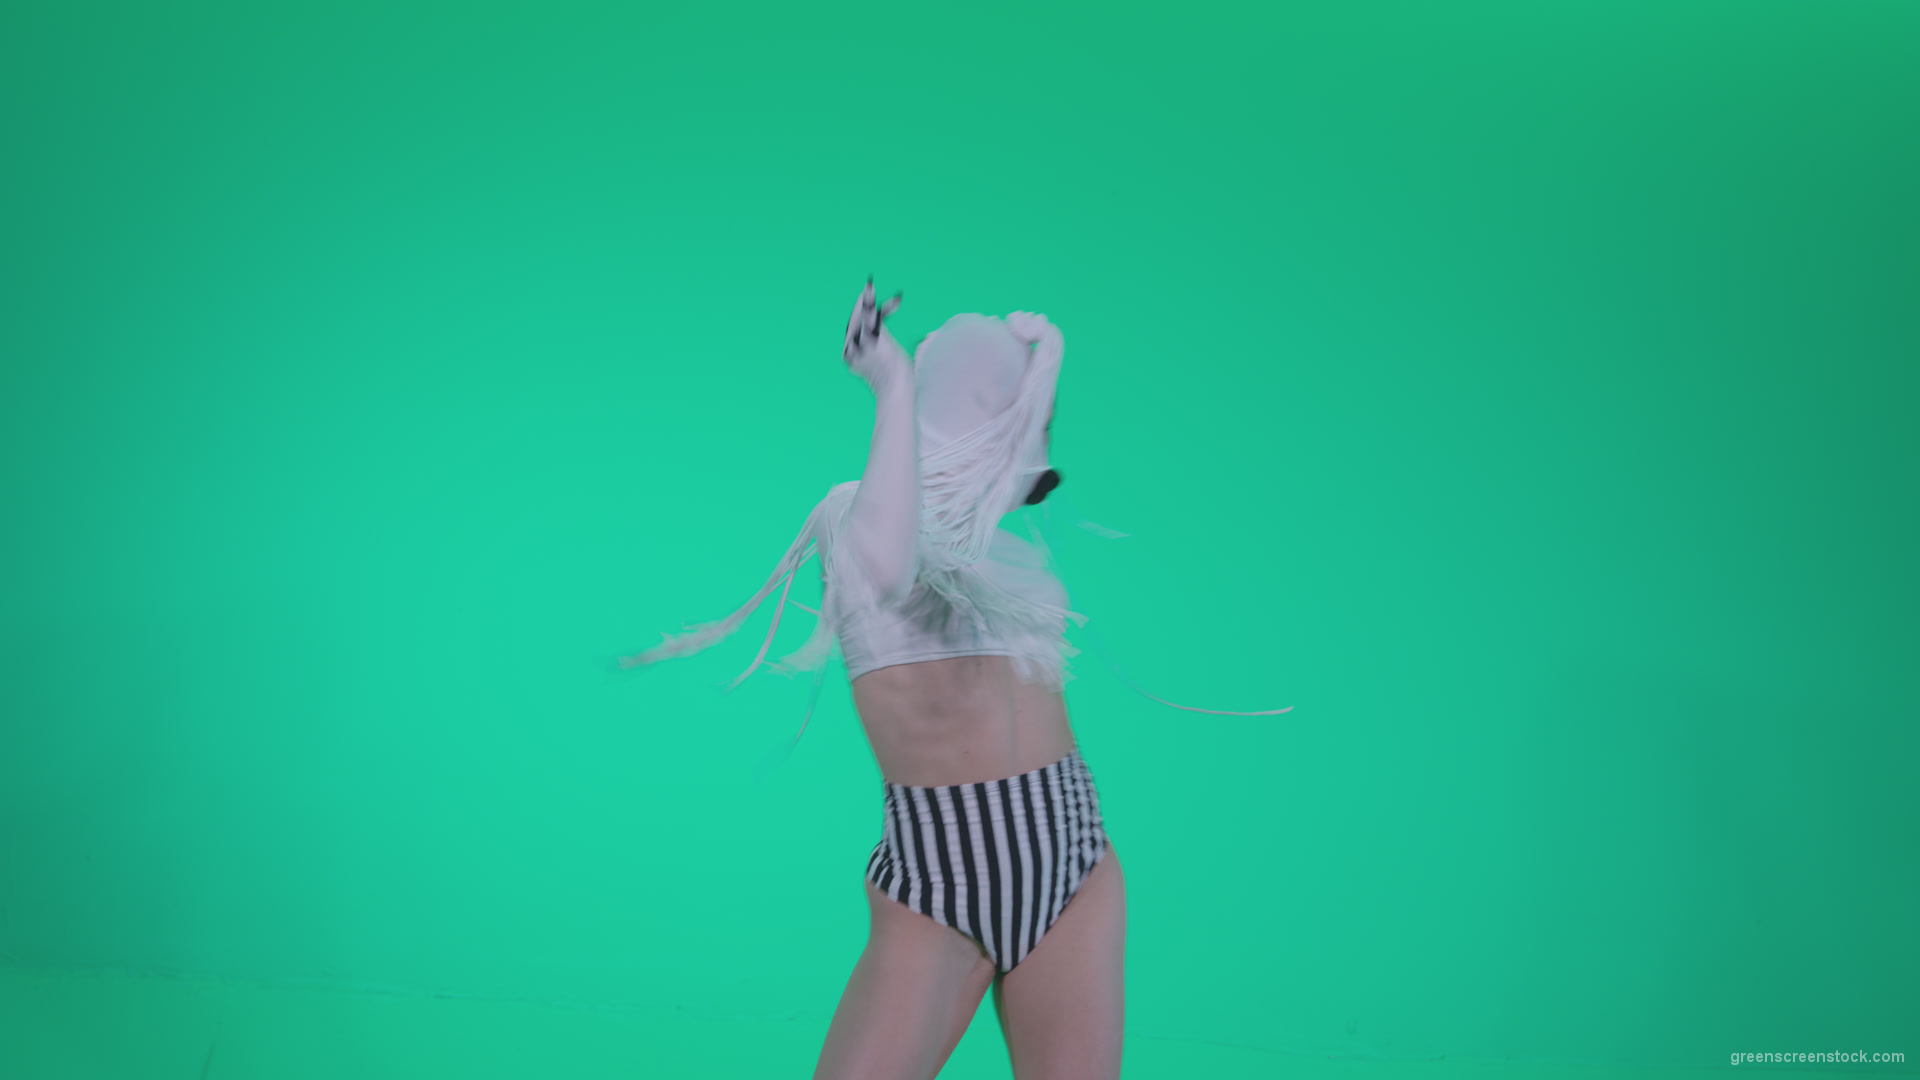 Go-go-Dancer-with-Latex-Top-t9-Green-Screen-Video-Footage_006 Green Screen Stock